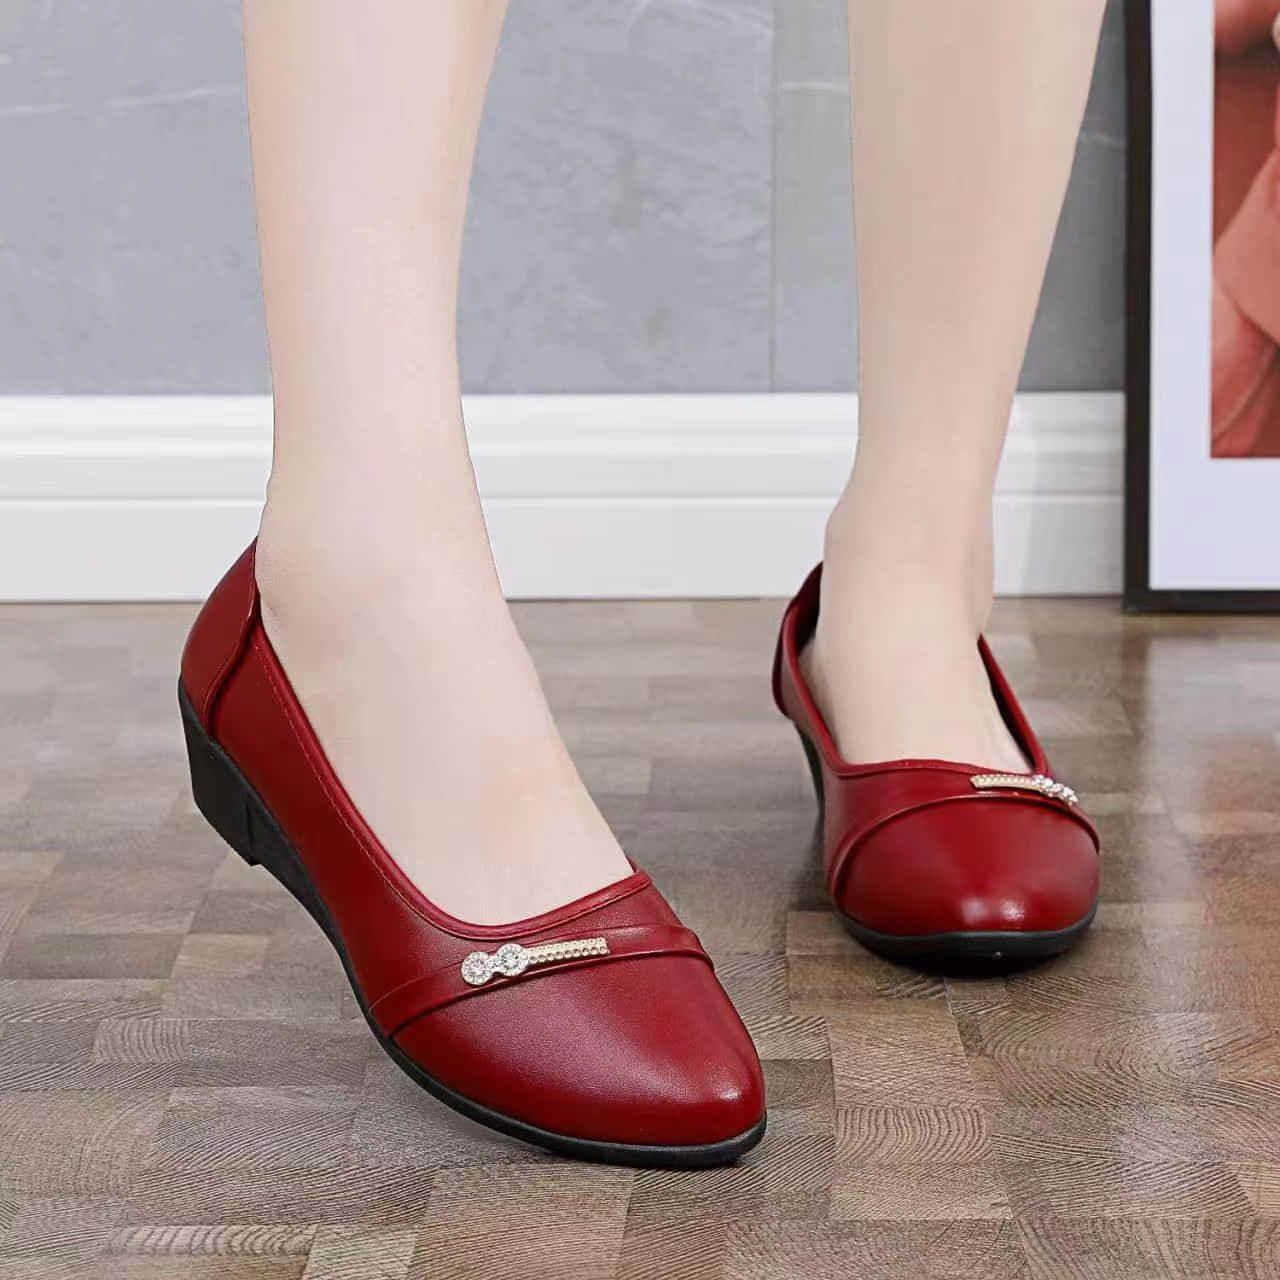 Stylish Red Shoes on a Wooden Floor Wallpaper